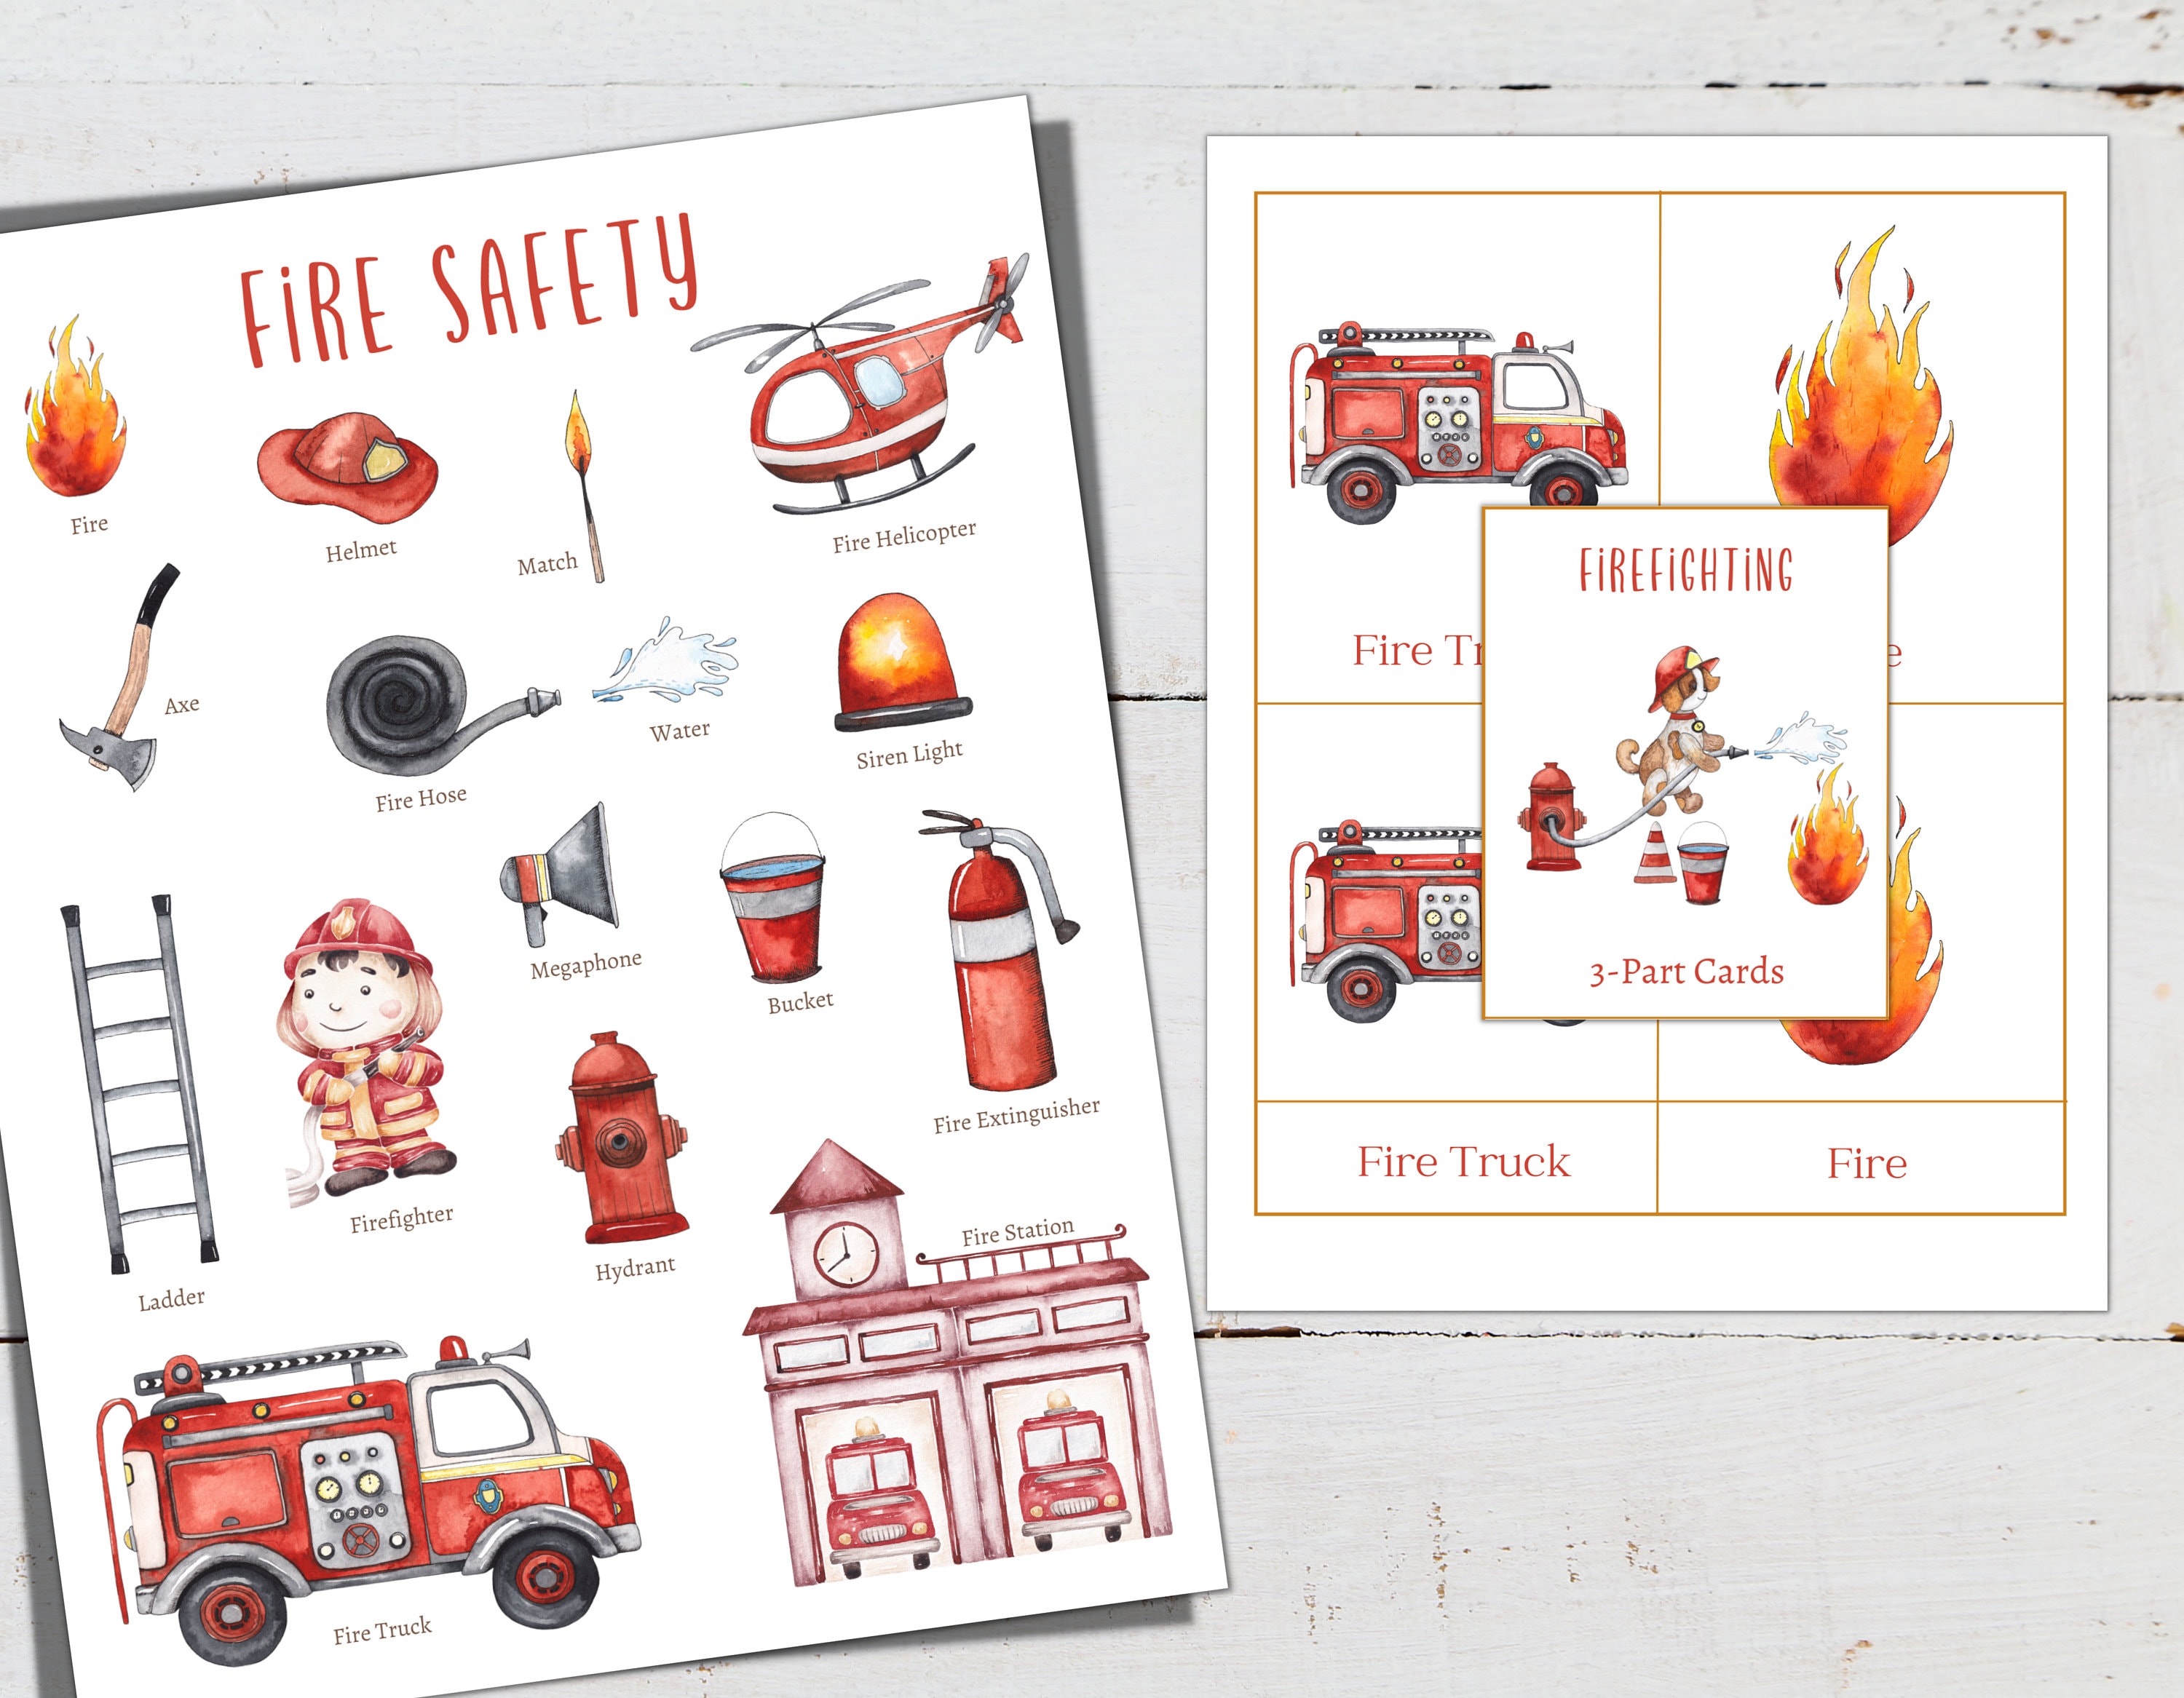 Fire Safety Drawing/Fire Safety Poster/Industrial Fire Safety Rules/ Poster  For School Project - YouTube